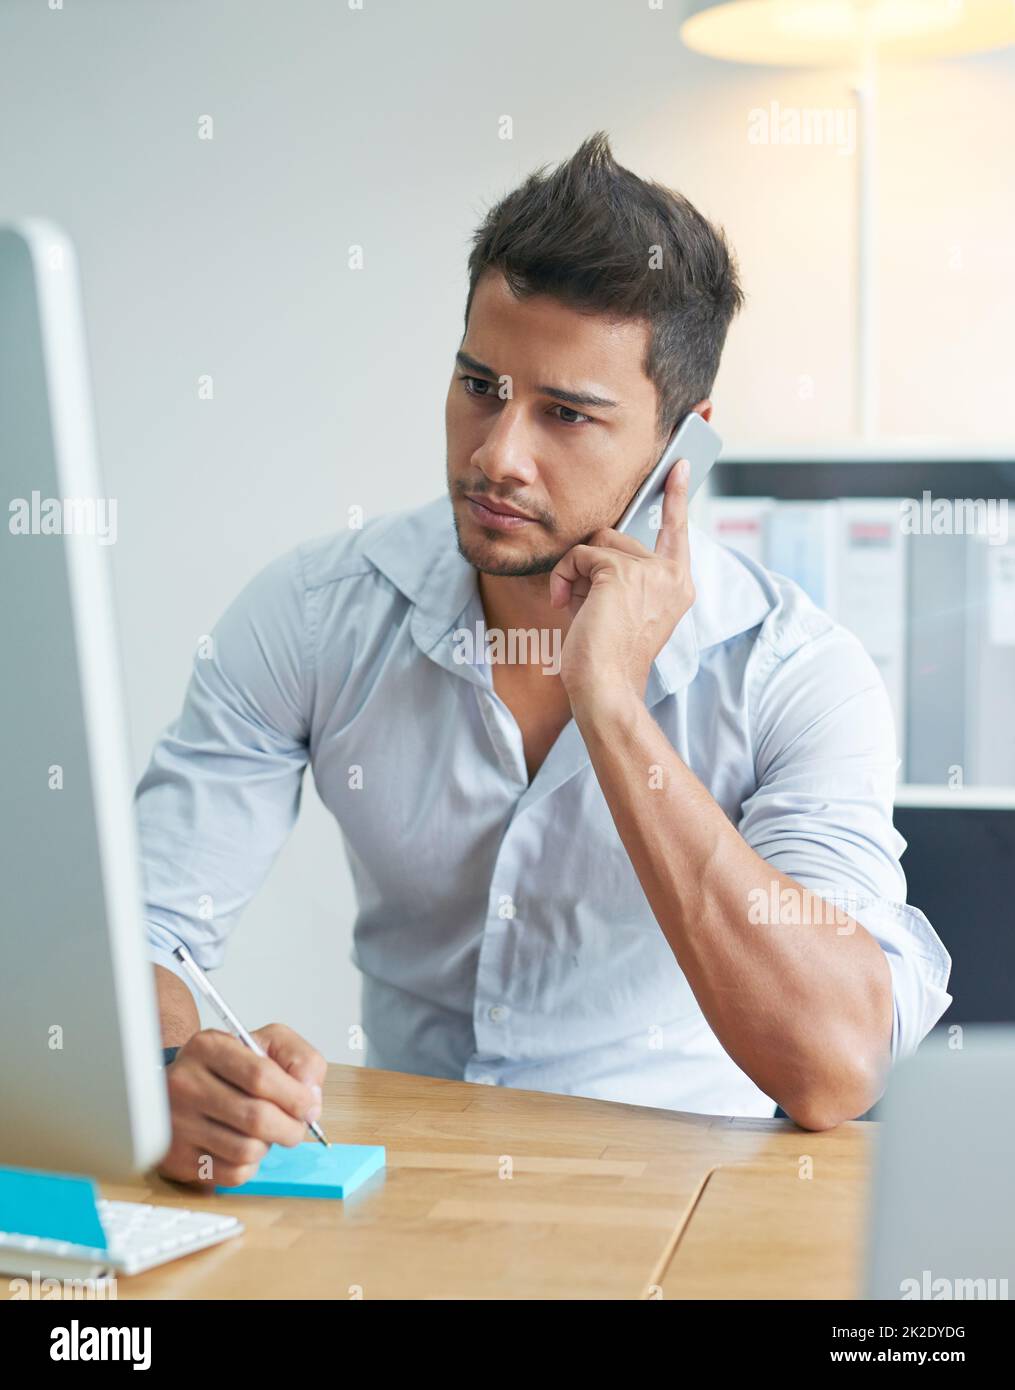 This news could have a negative effect on business. Shot of a worried businessman talking on his phone while looking at his computer. Stock Photo